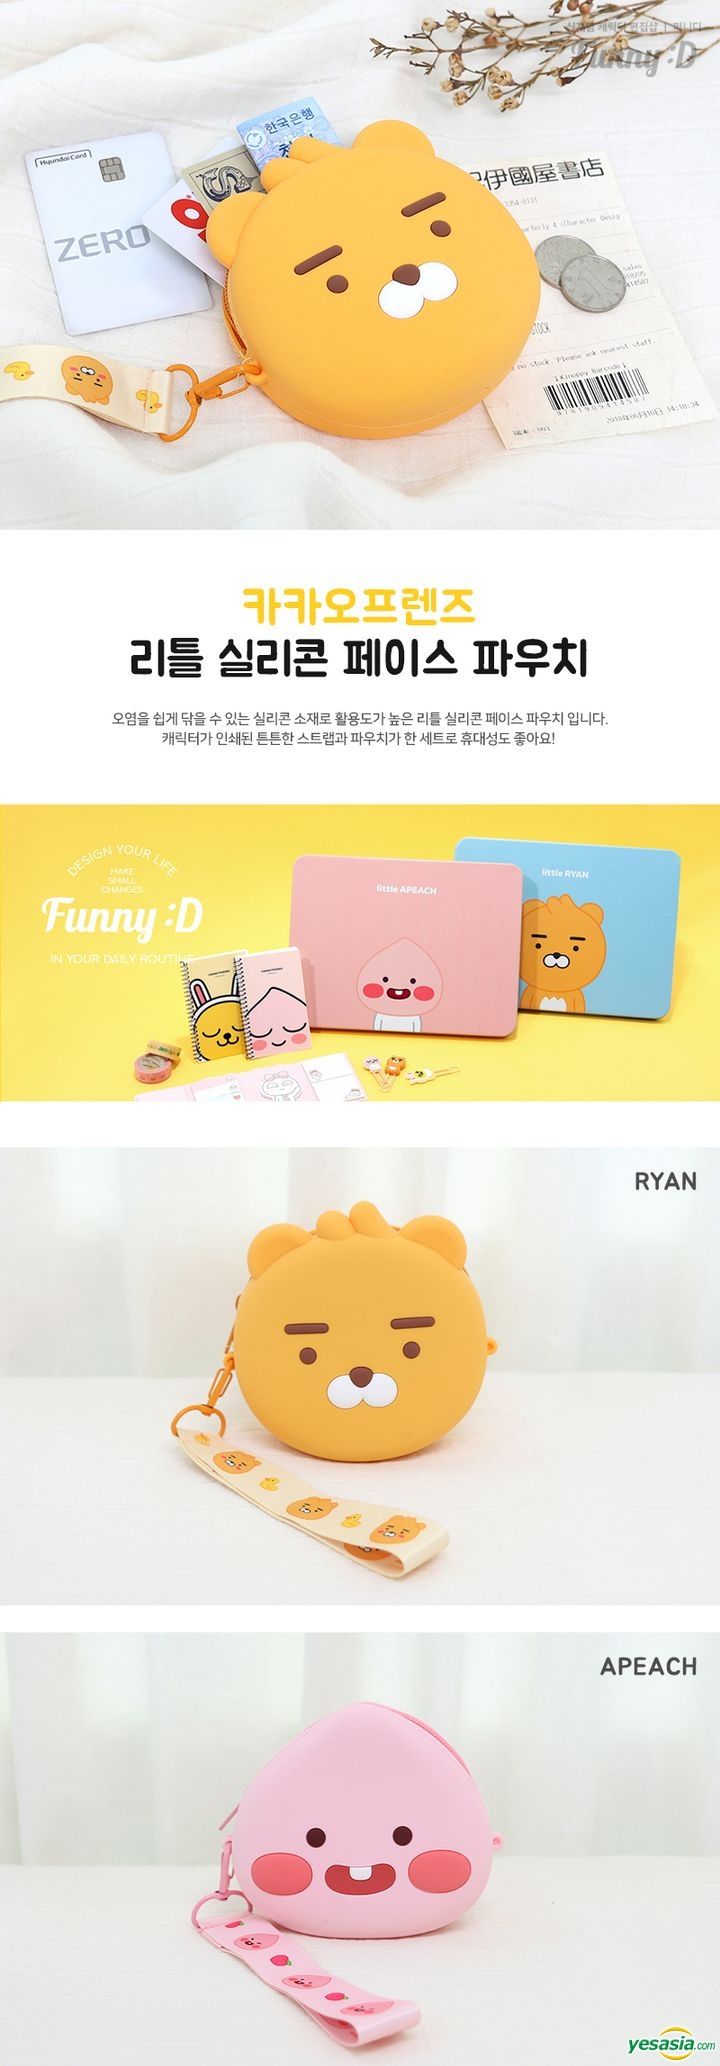 Yesasia Image Gallery Kakao Friends Little Silicon Face Pouch Apeach 2222